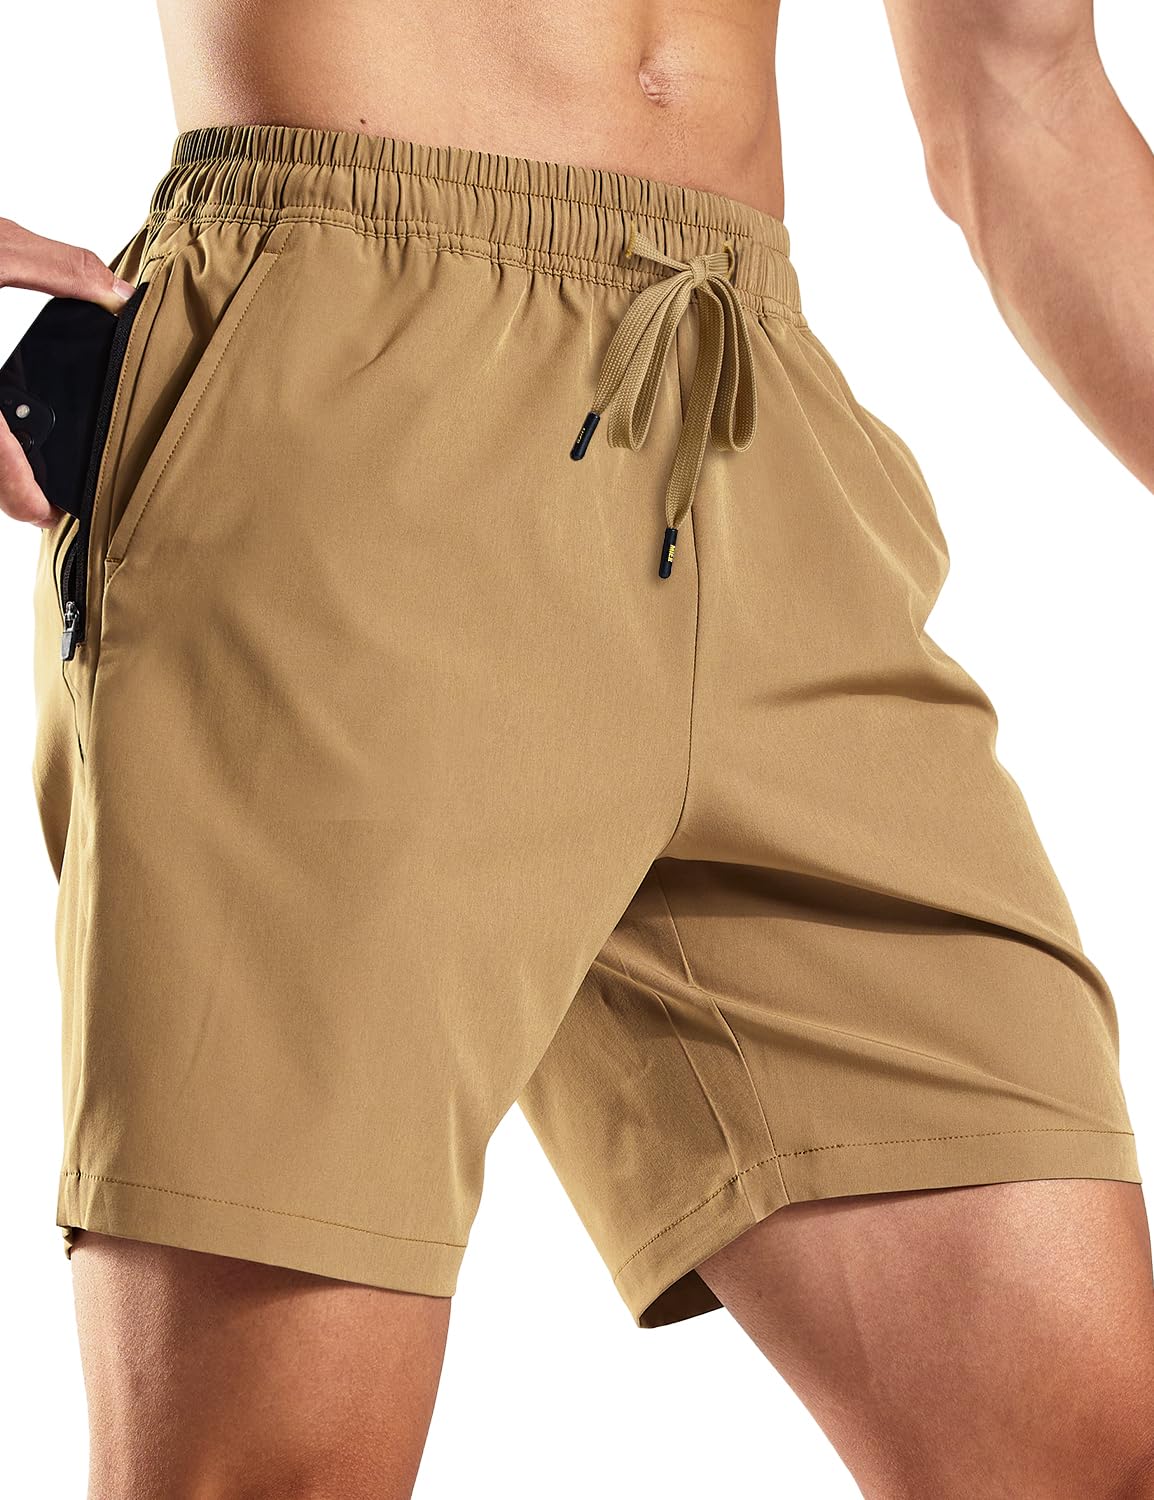 Men's 7 Inch Quick-Dry Running Shorts with Zipper Pockets